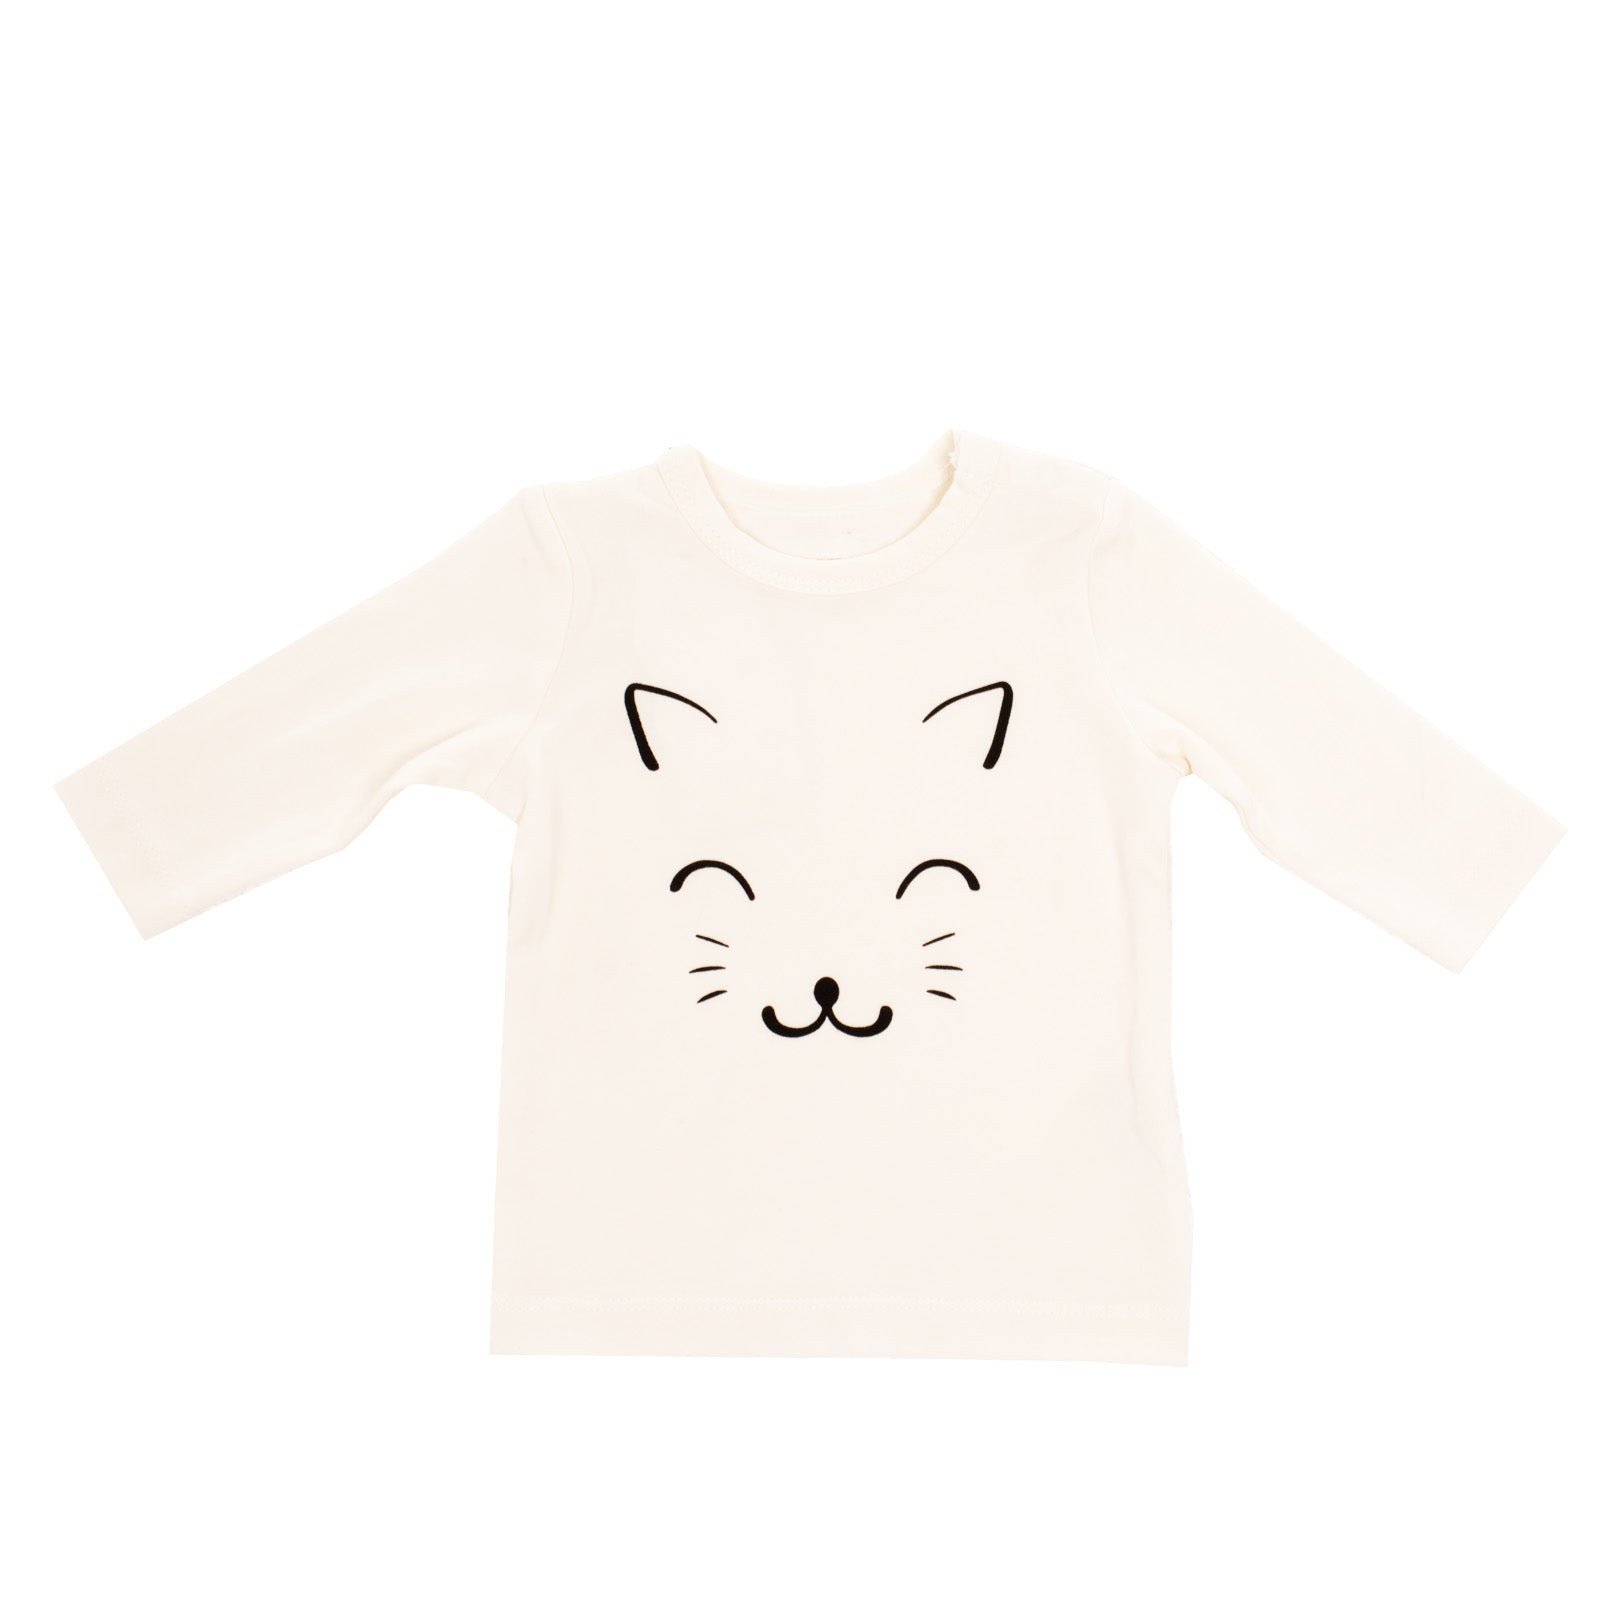 NAME IT T-Shirt Top Size 0-1M / 50CM Kitty Face Print Front Crew Neck gallery main photo